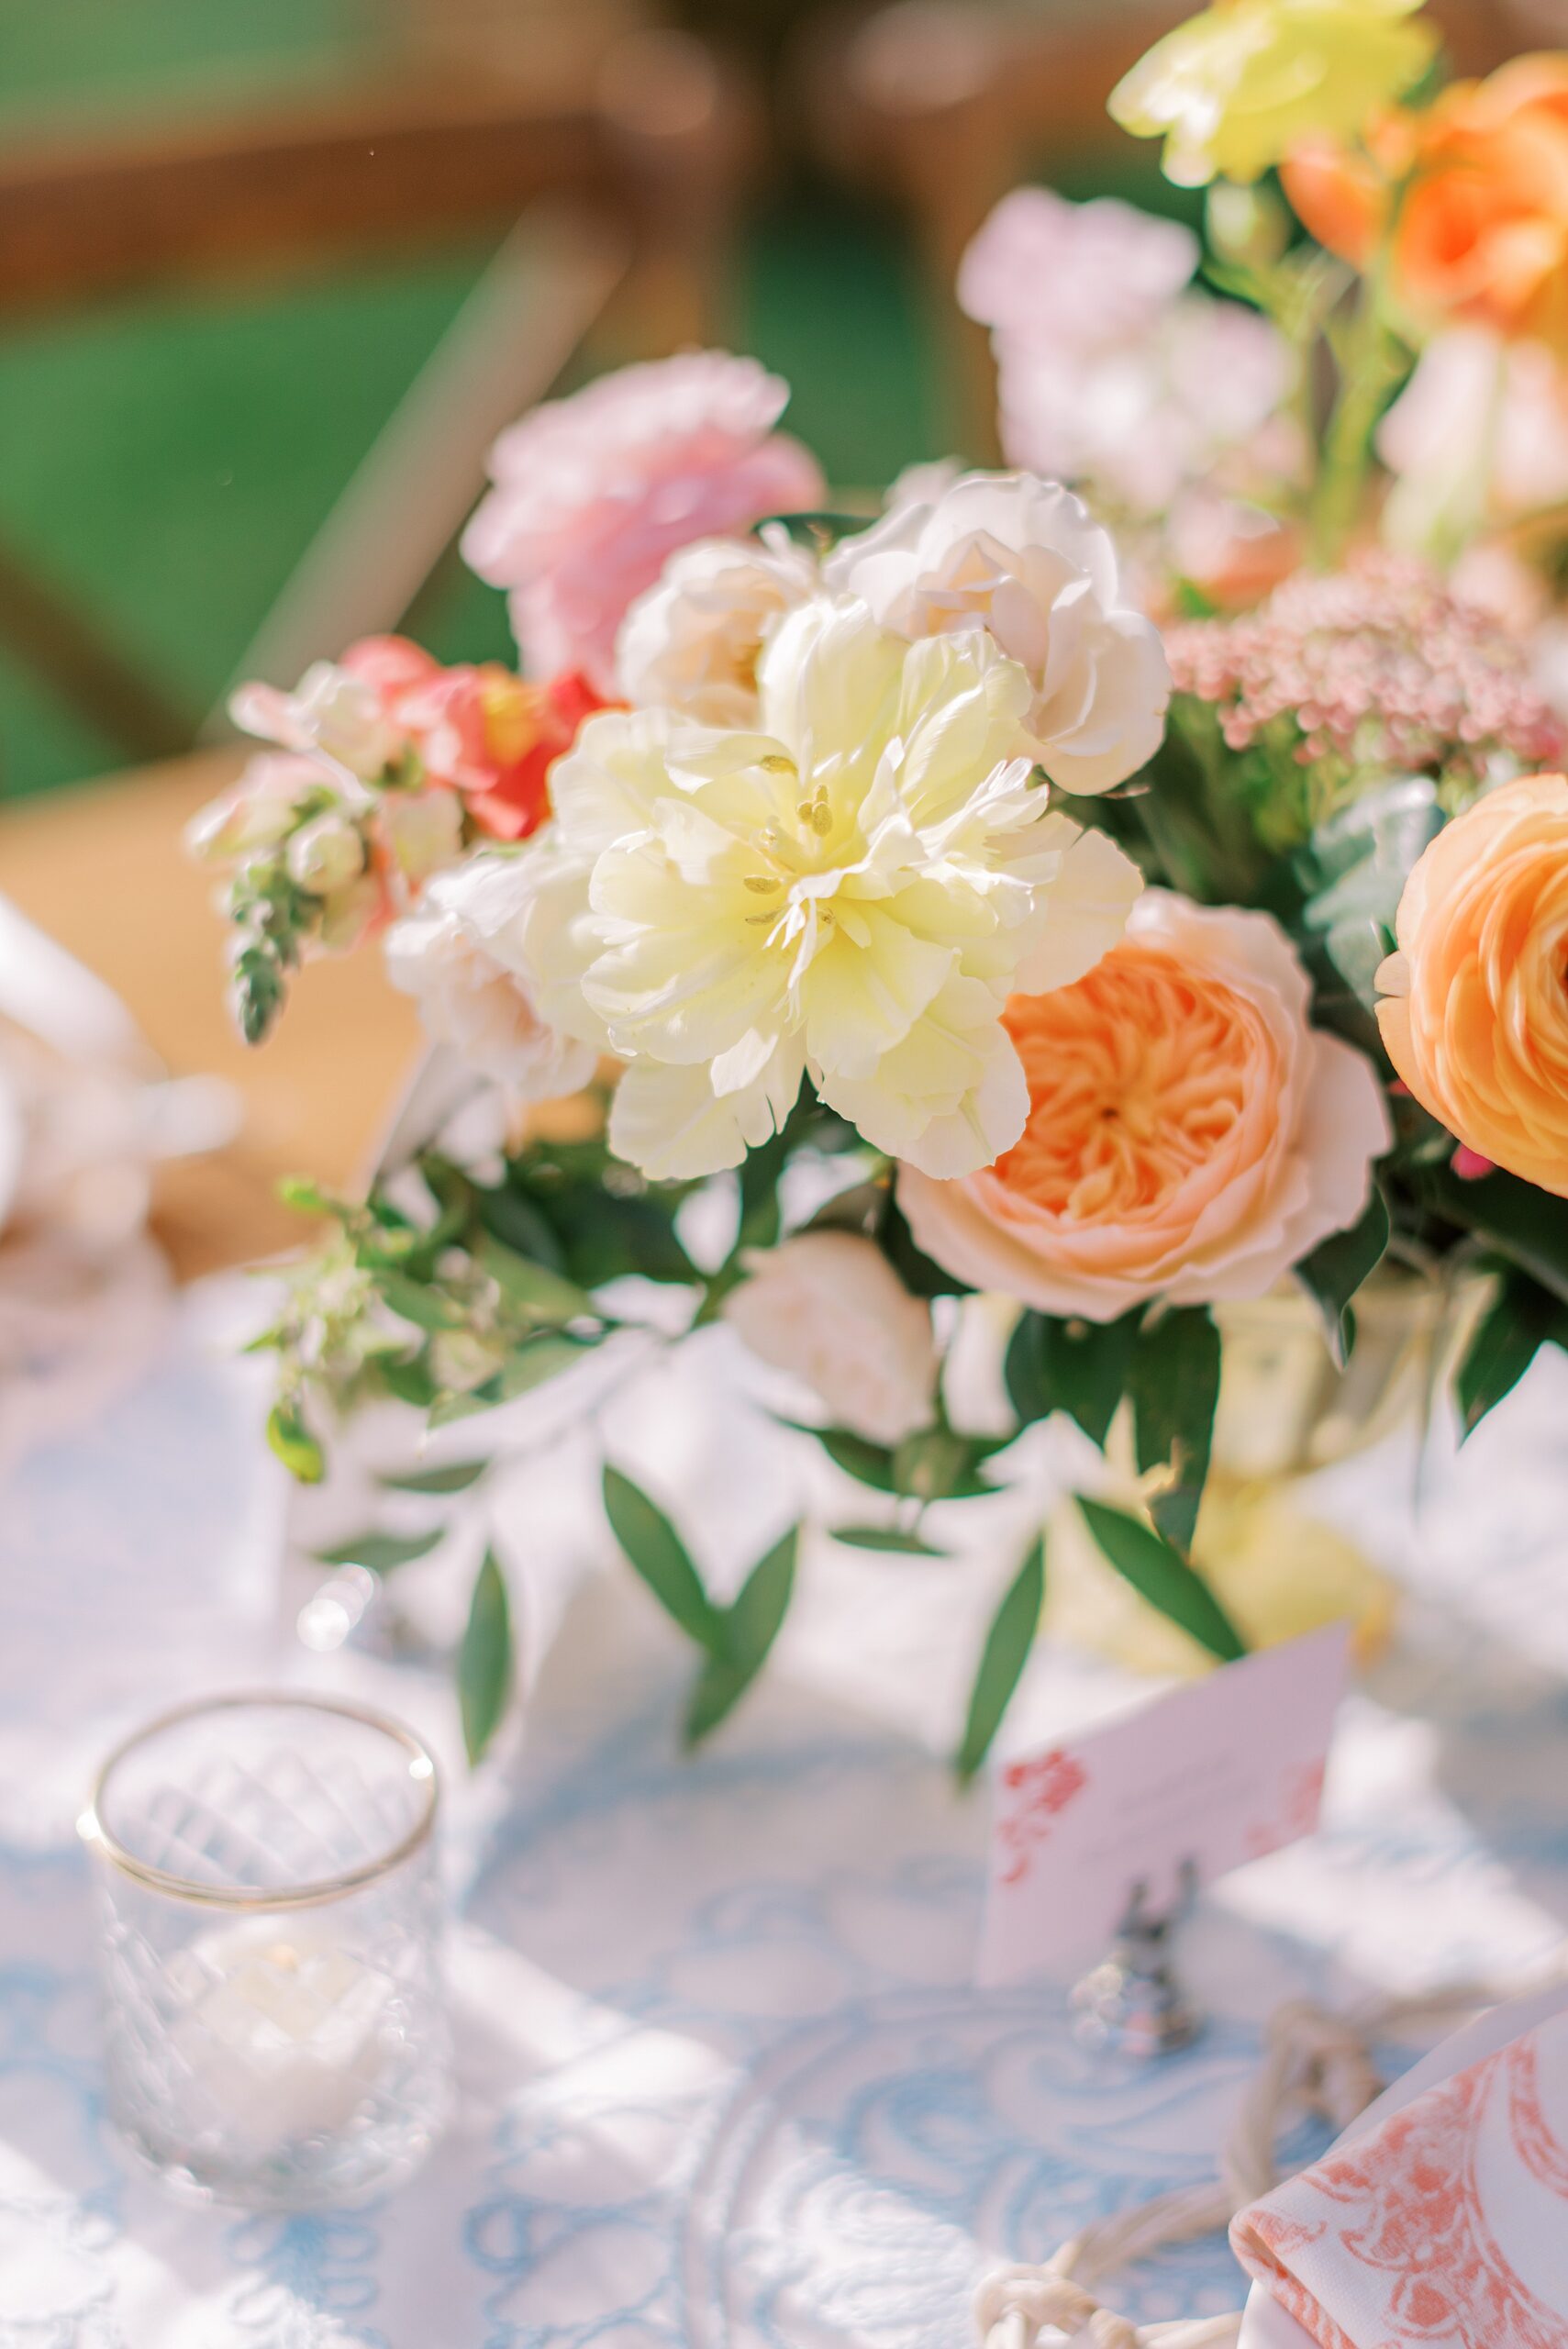 Details of a colorful outdoor table setting with flowers at a charlotte country club wedding